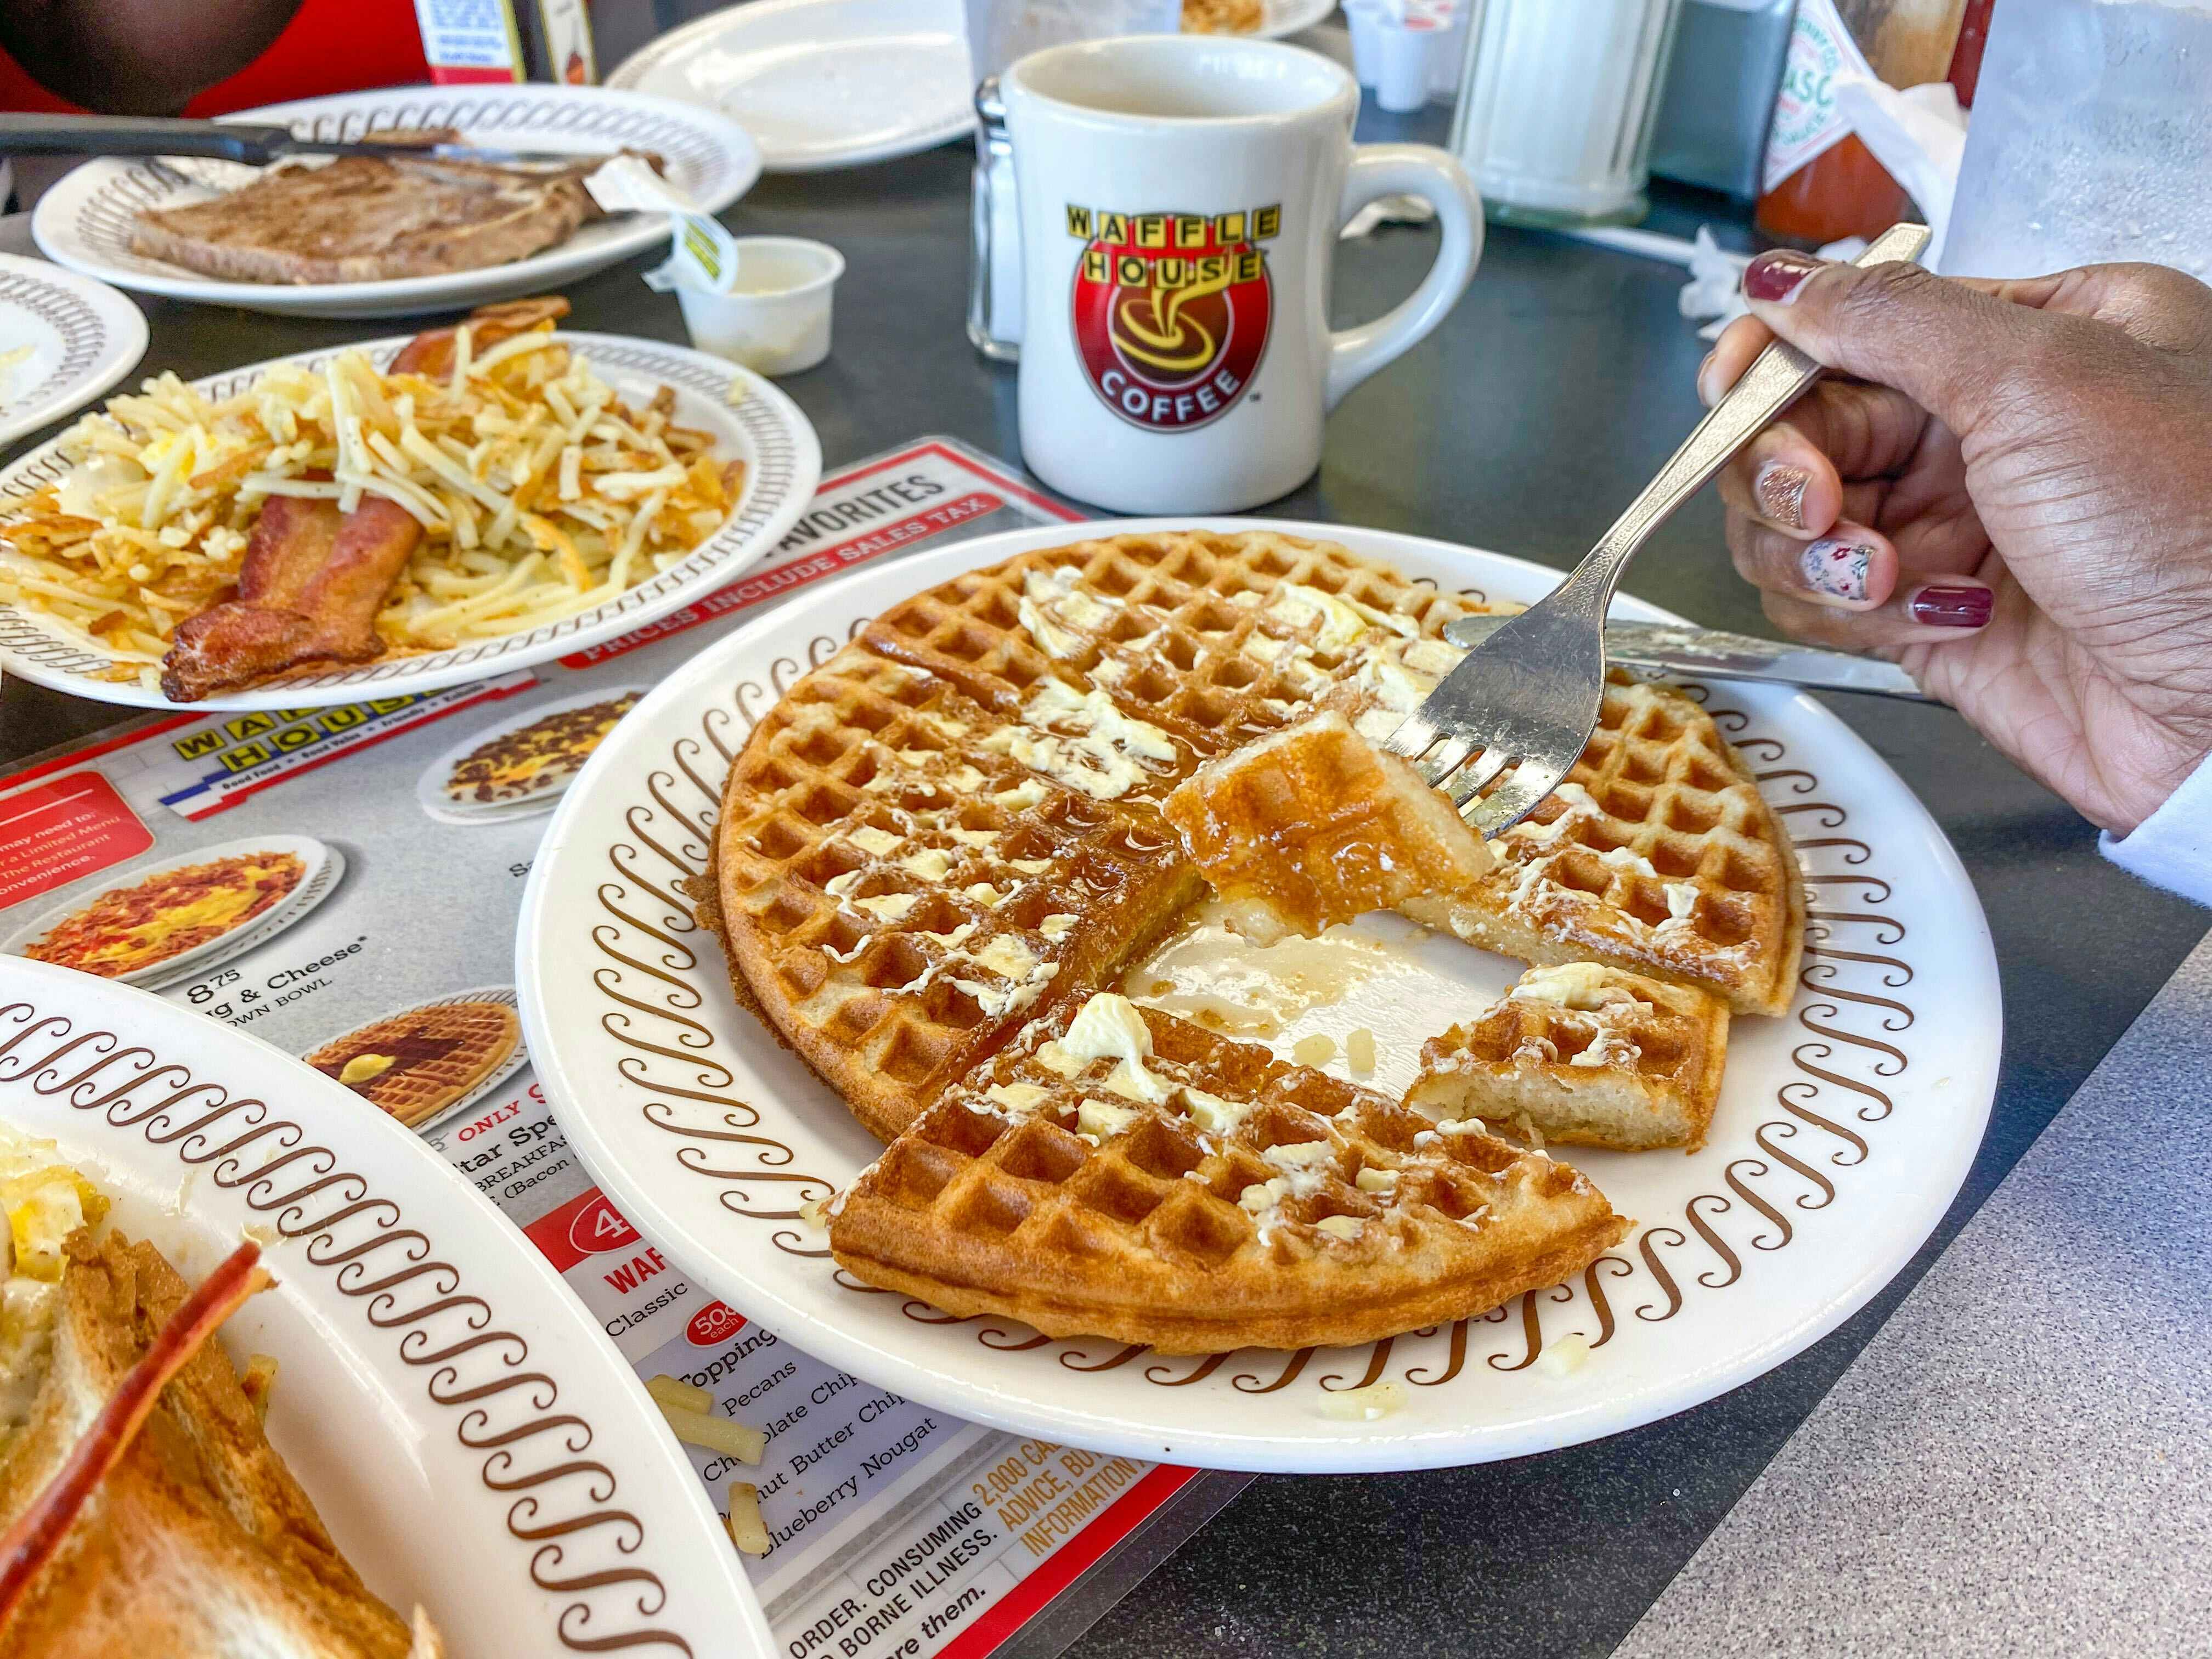 A person's hand using a fork to pick up a piece of a waffle from a plate on a Waffle House table next to other plated breakfast items.